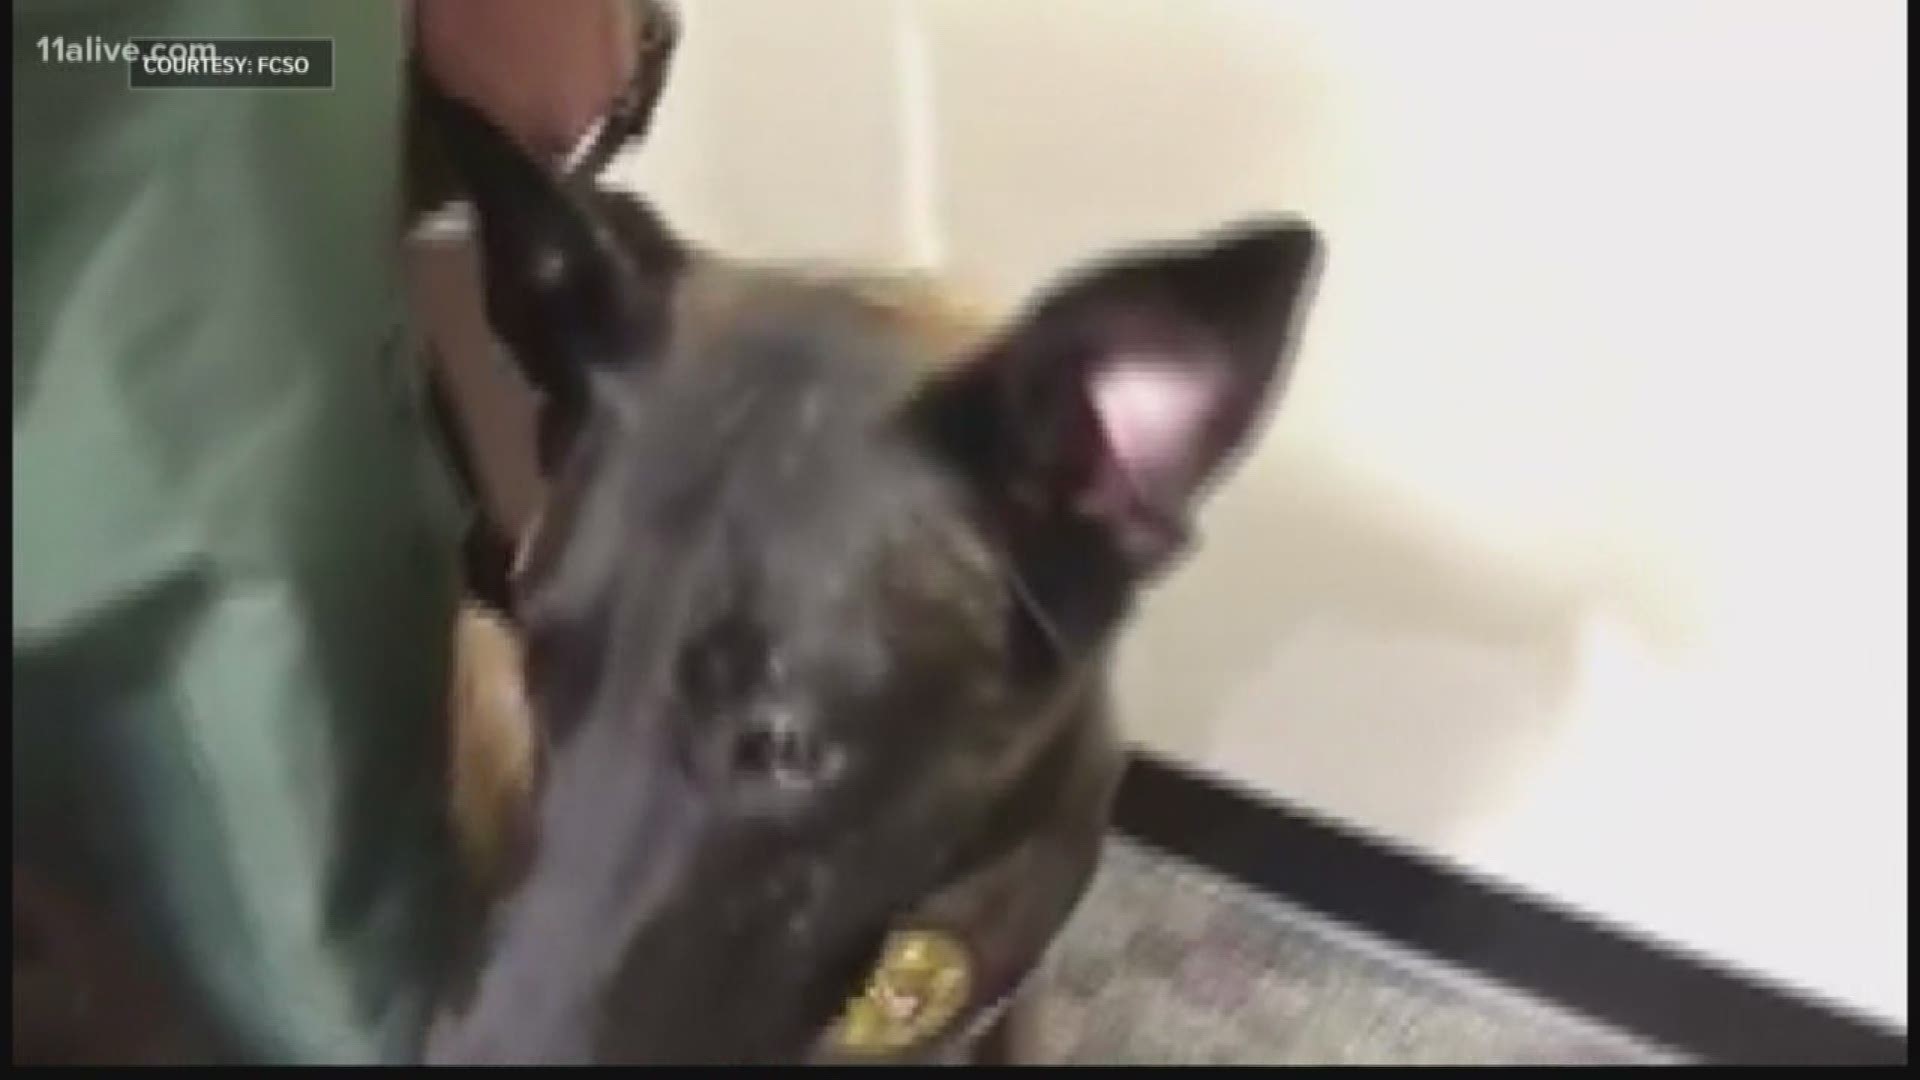 Police bodycam video released Friday shows a veterinary technician describing the attack by a K-9 on her coworker in a harrowing incident this week that left the wom